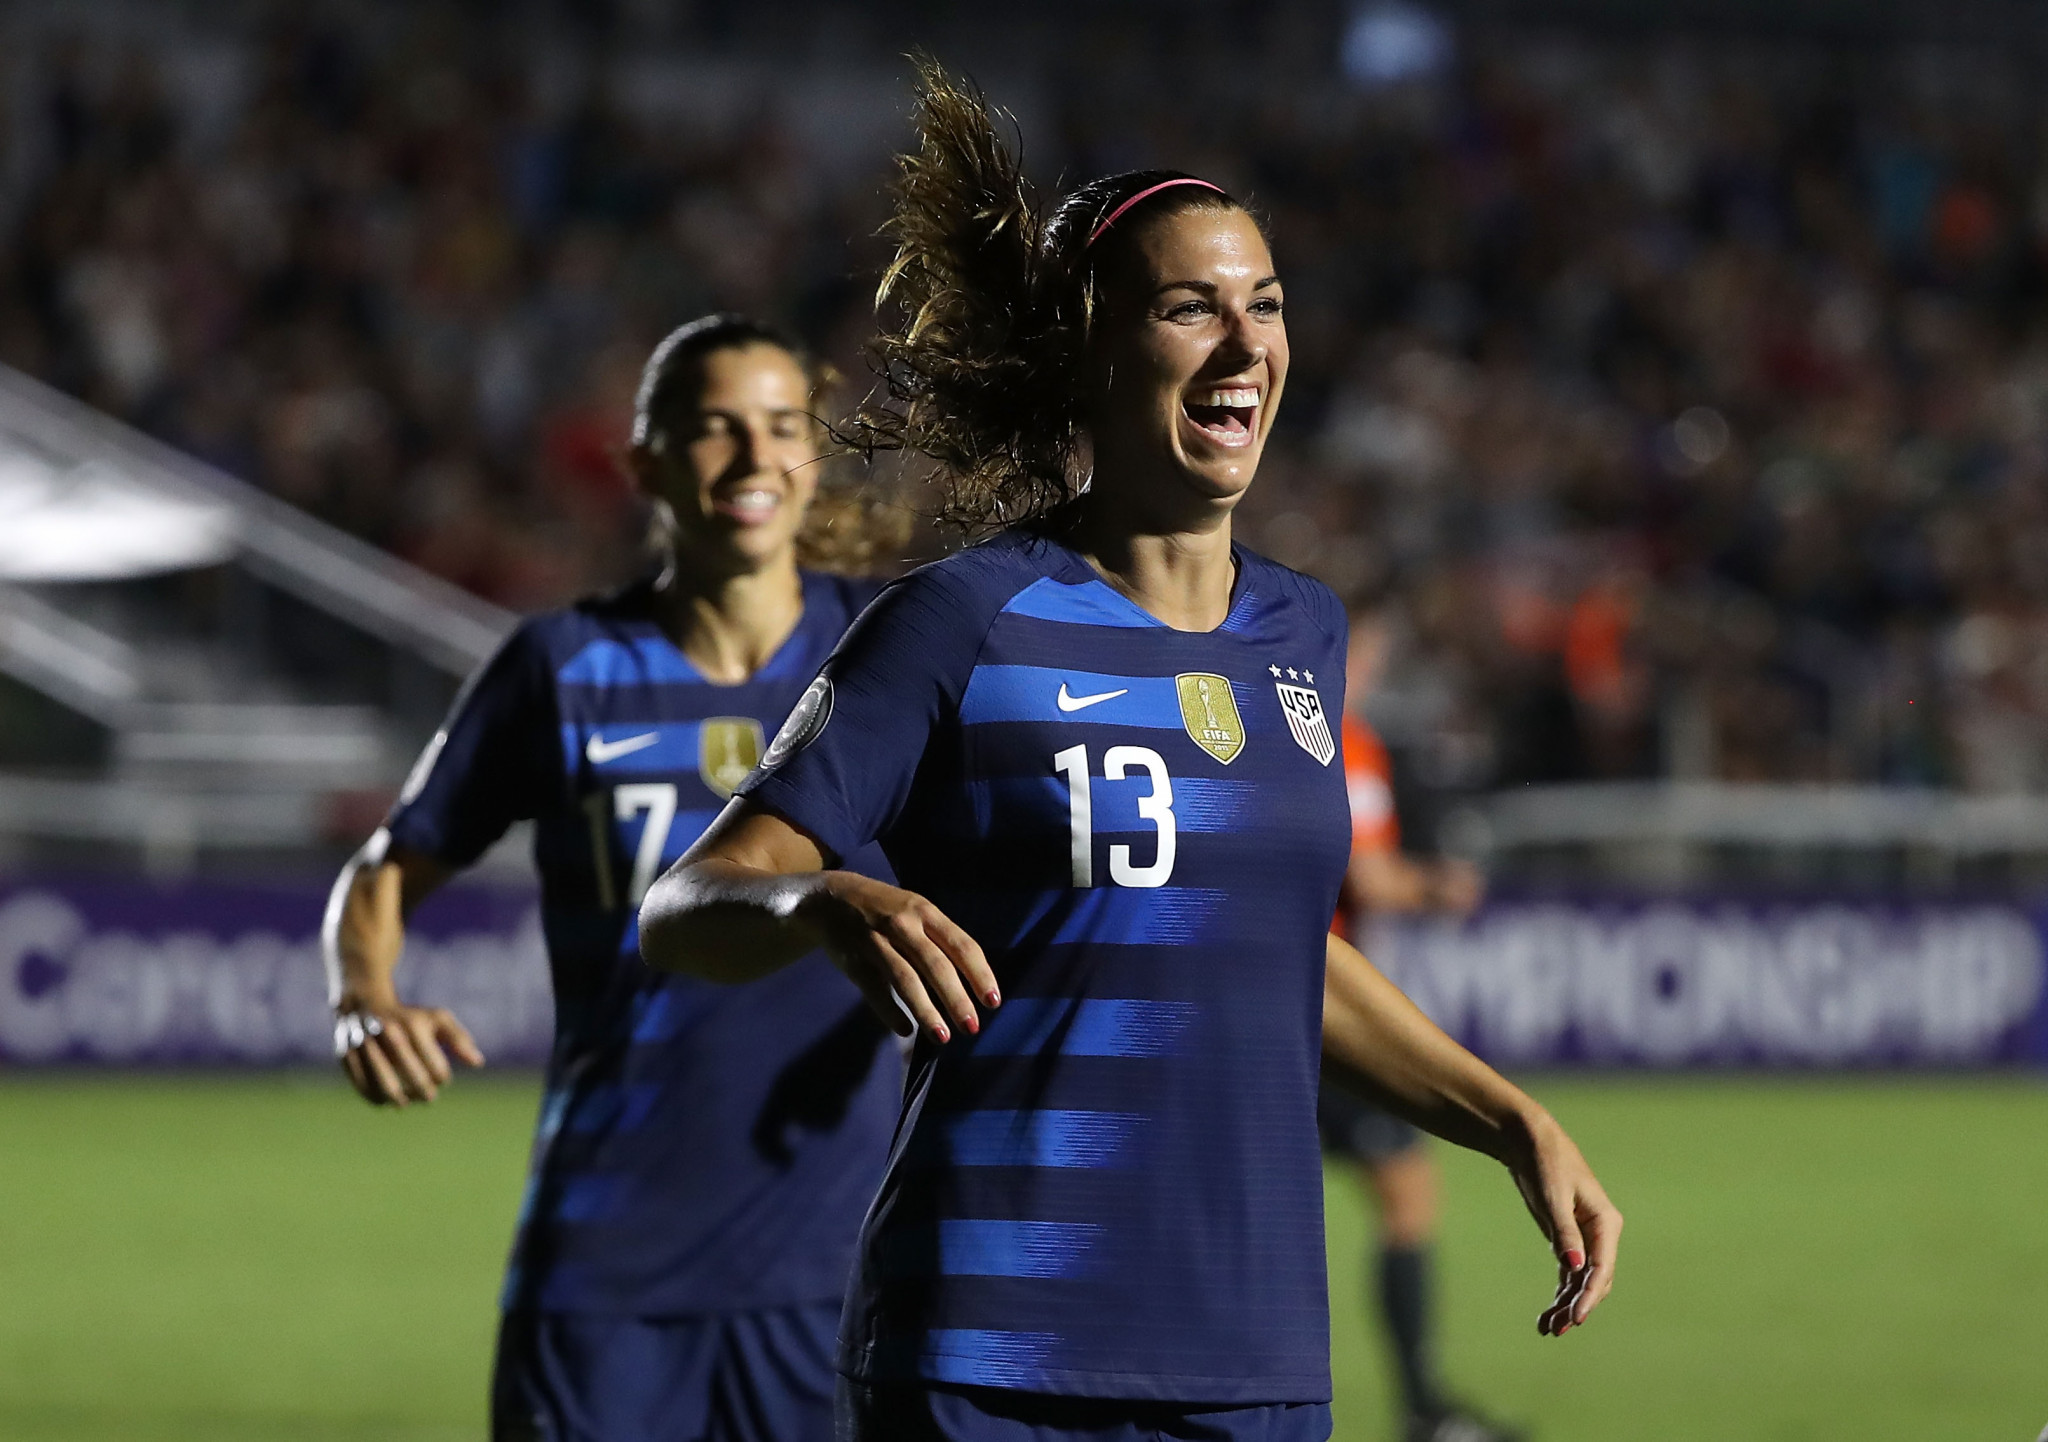 Alex Morgan of the United States celebrates scoring against Mexico, a game which her team won 6-0 ©Getty Images